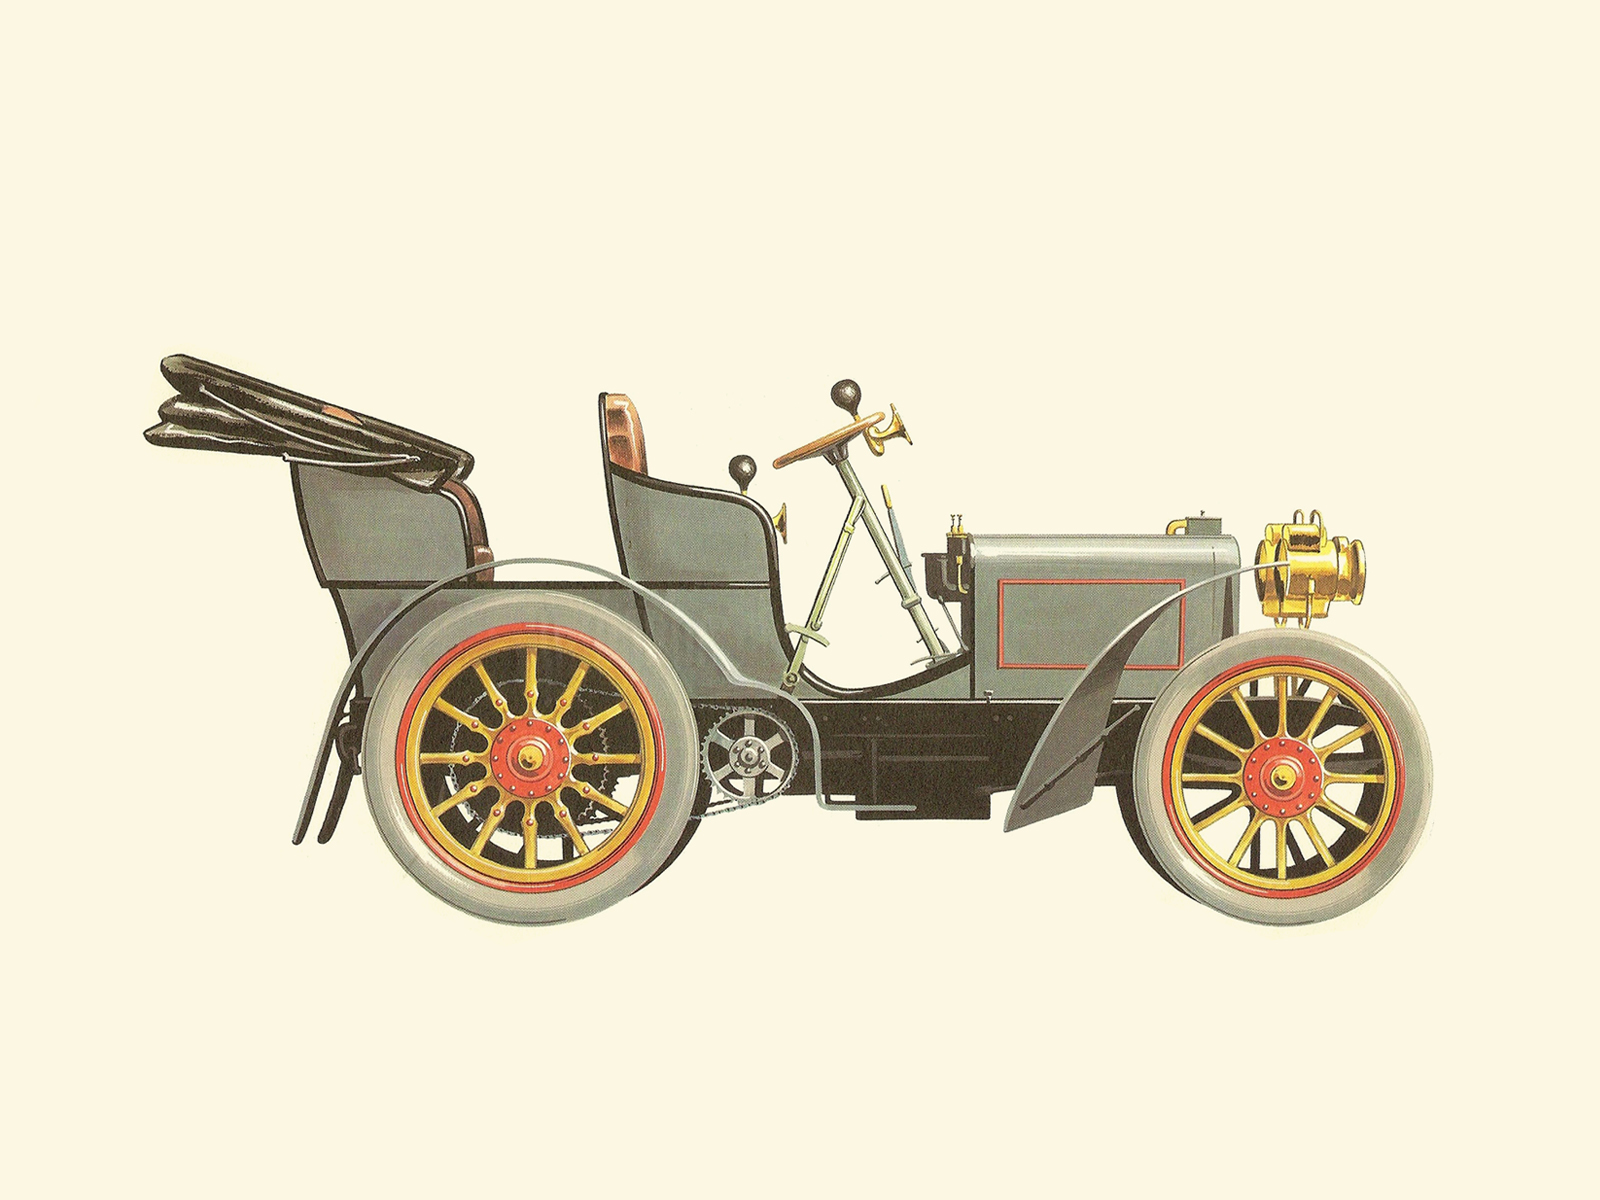 1901 Mercedes 35 HP - Illustrated by Pierre Dumont